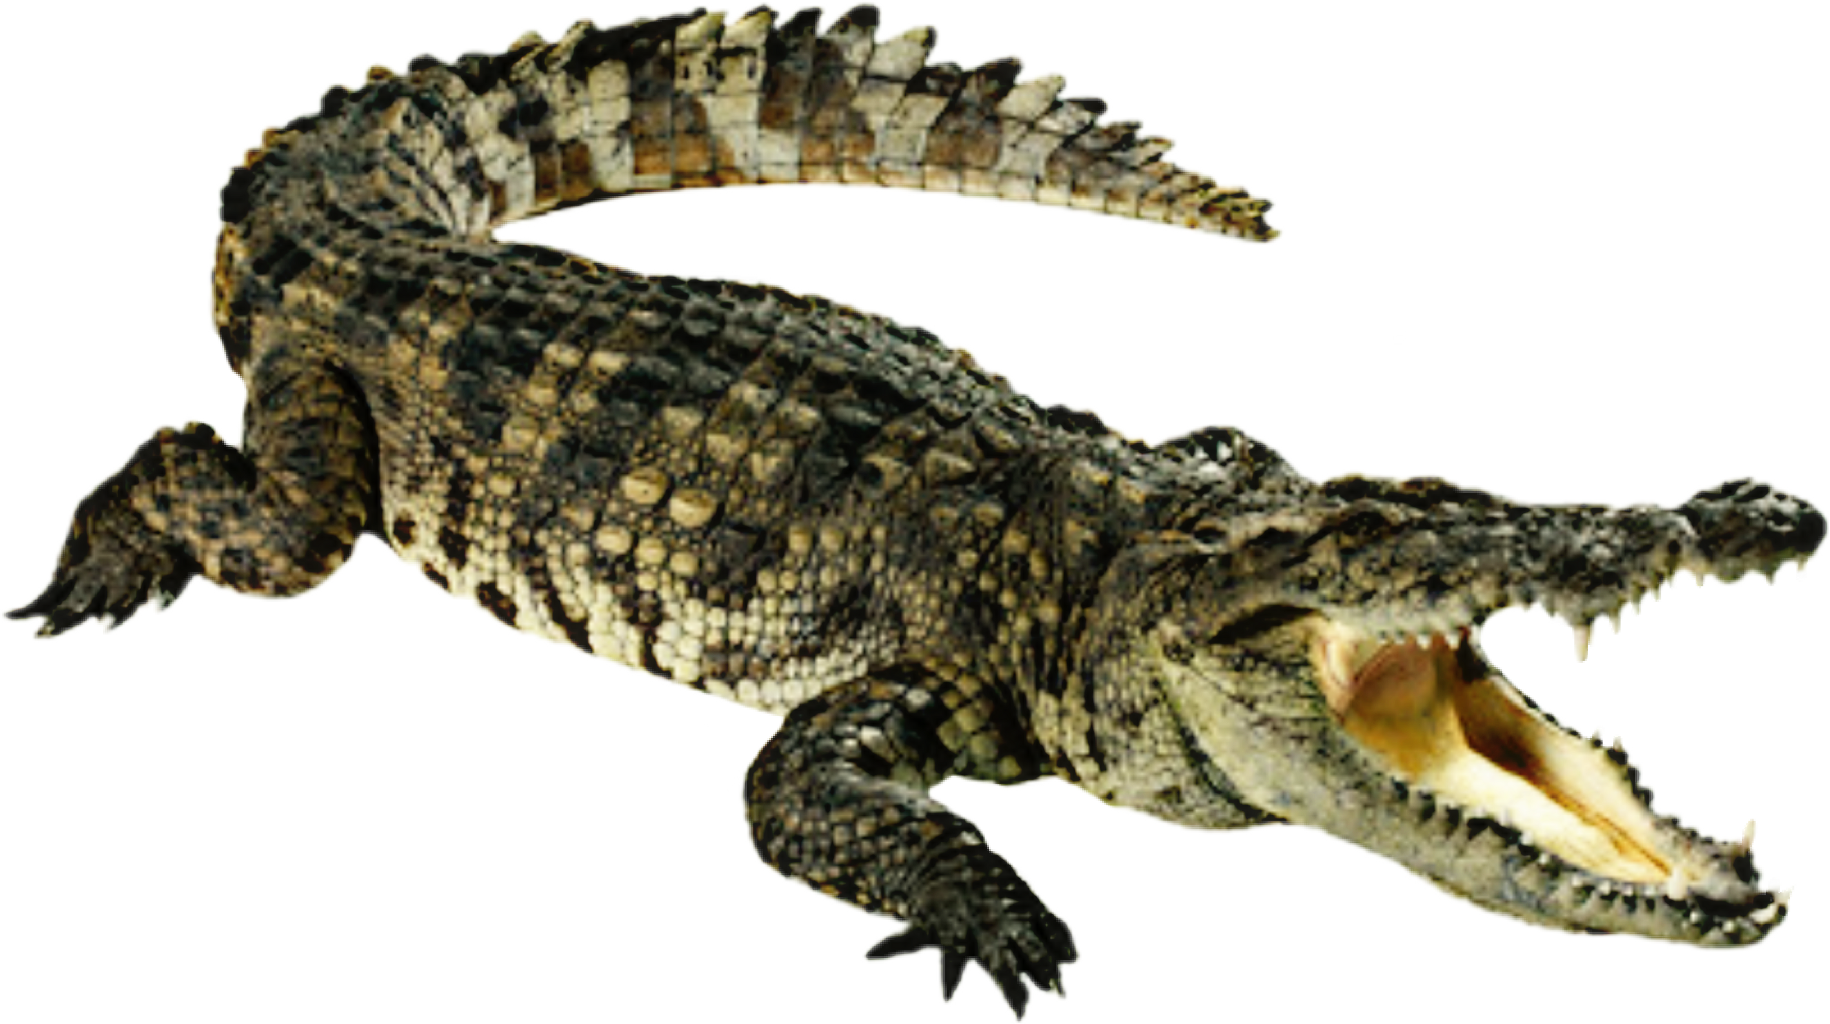 A Crocodile With Its Mouth Open